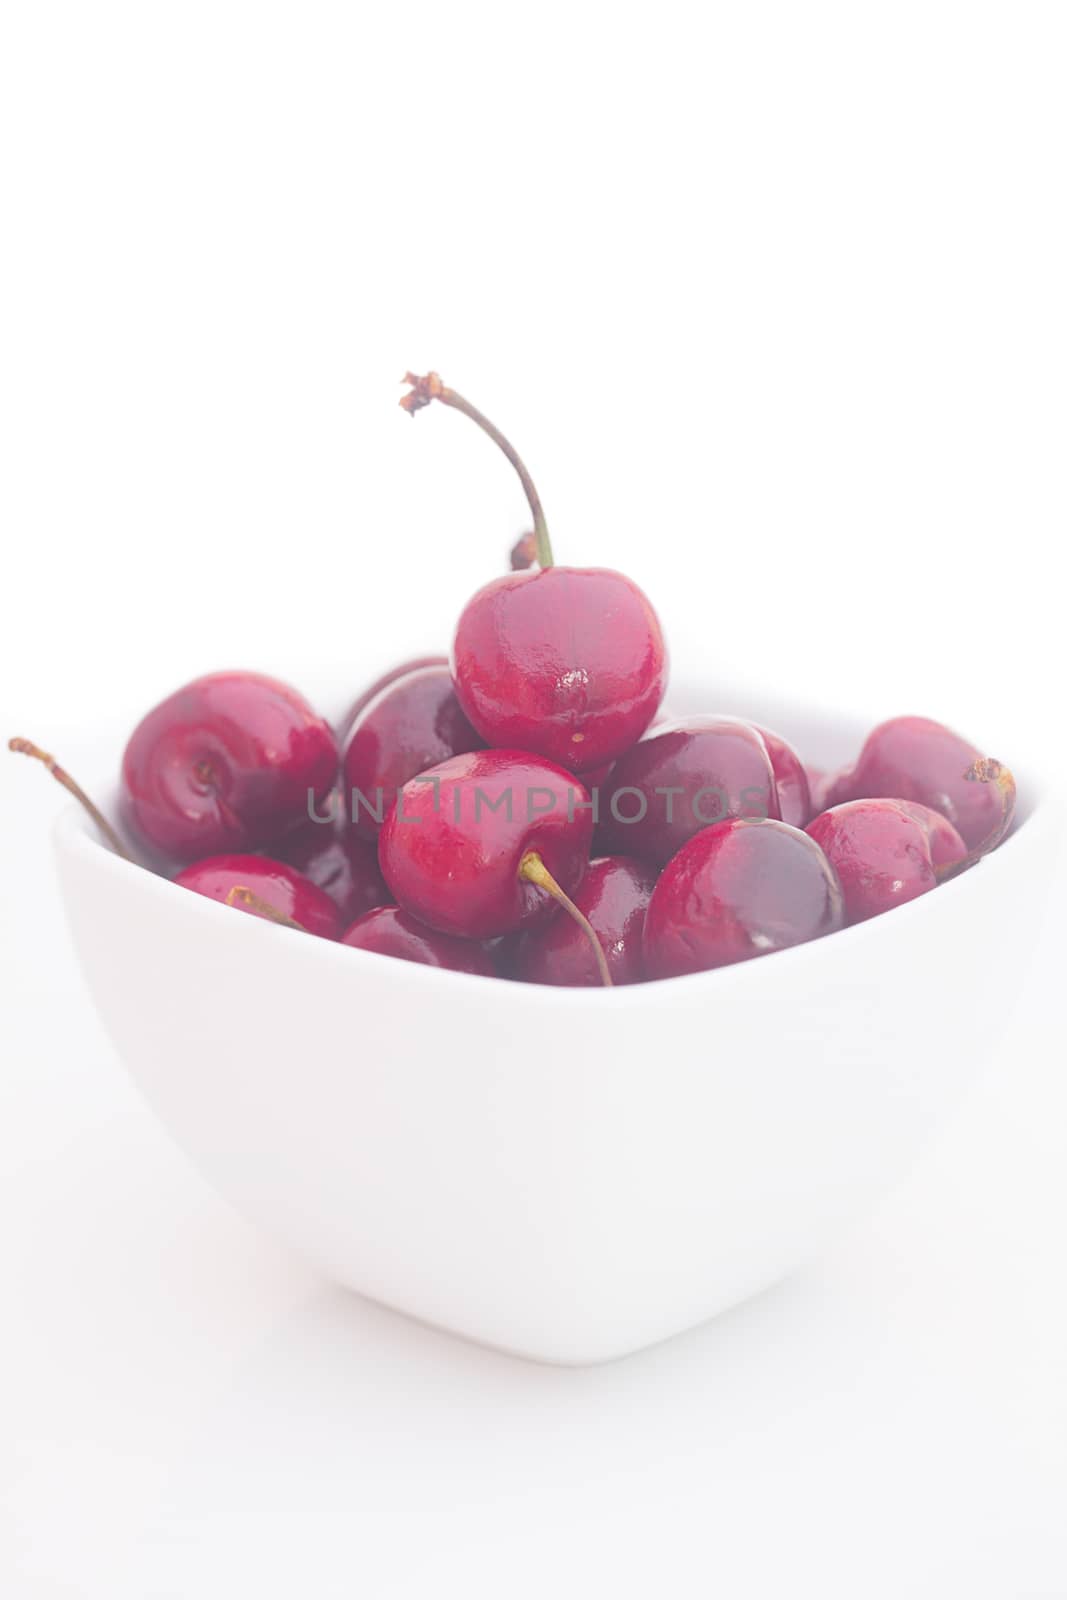 Cherries  in white bowl isolated on white